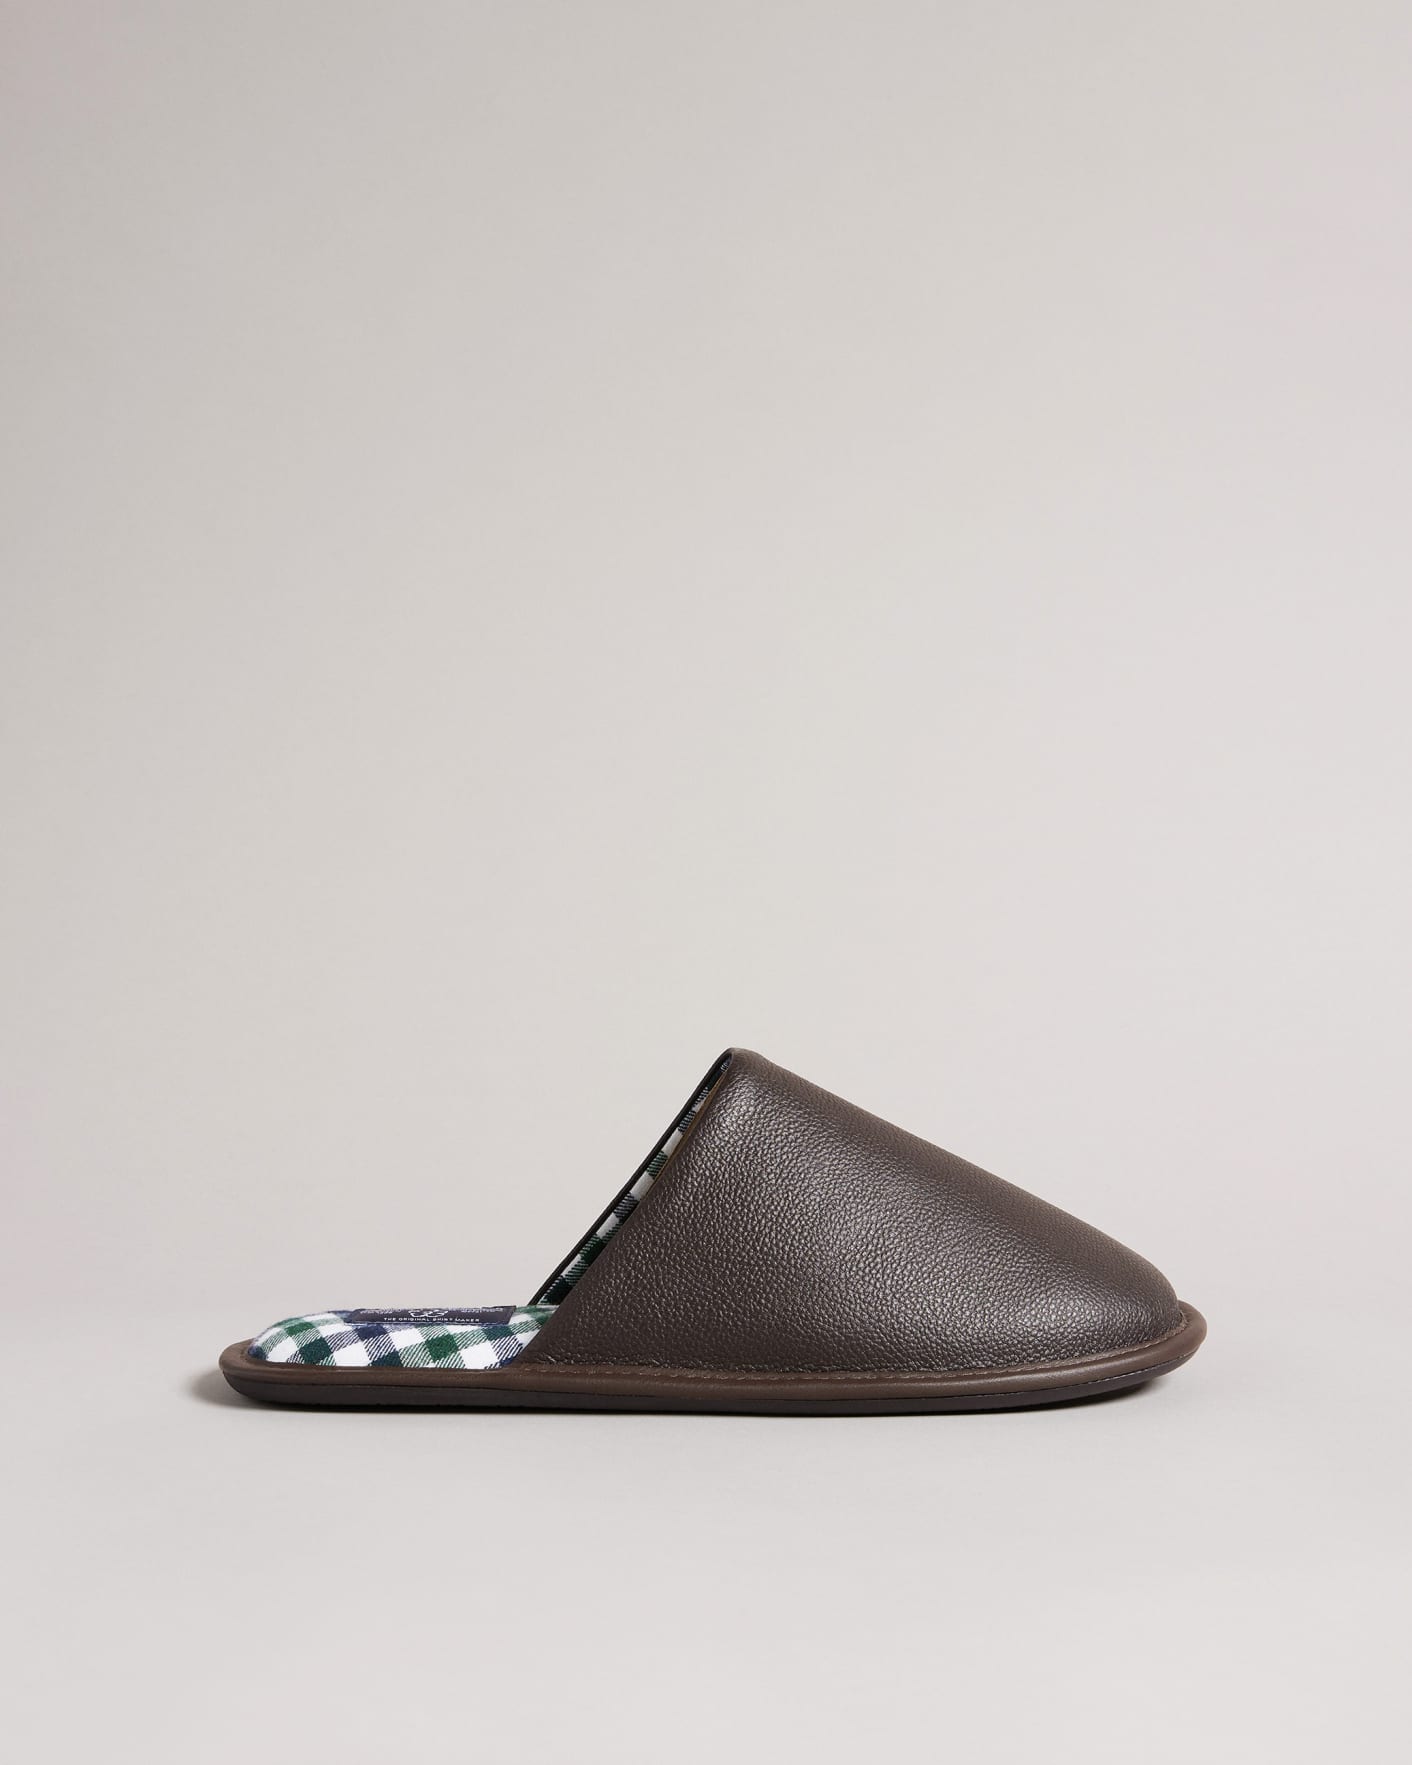 Brown-Chocolate Leather Mule Slippers Ted Baker